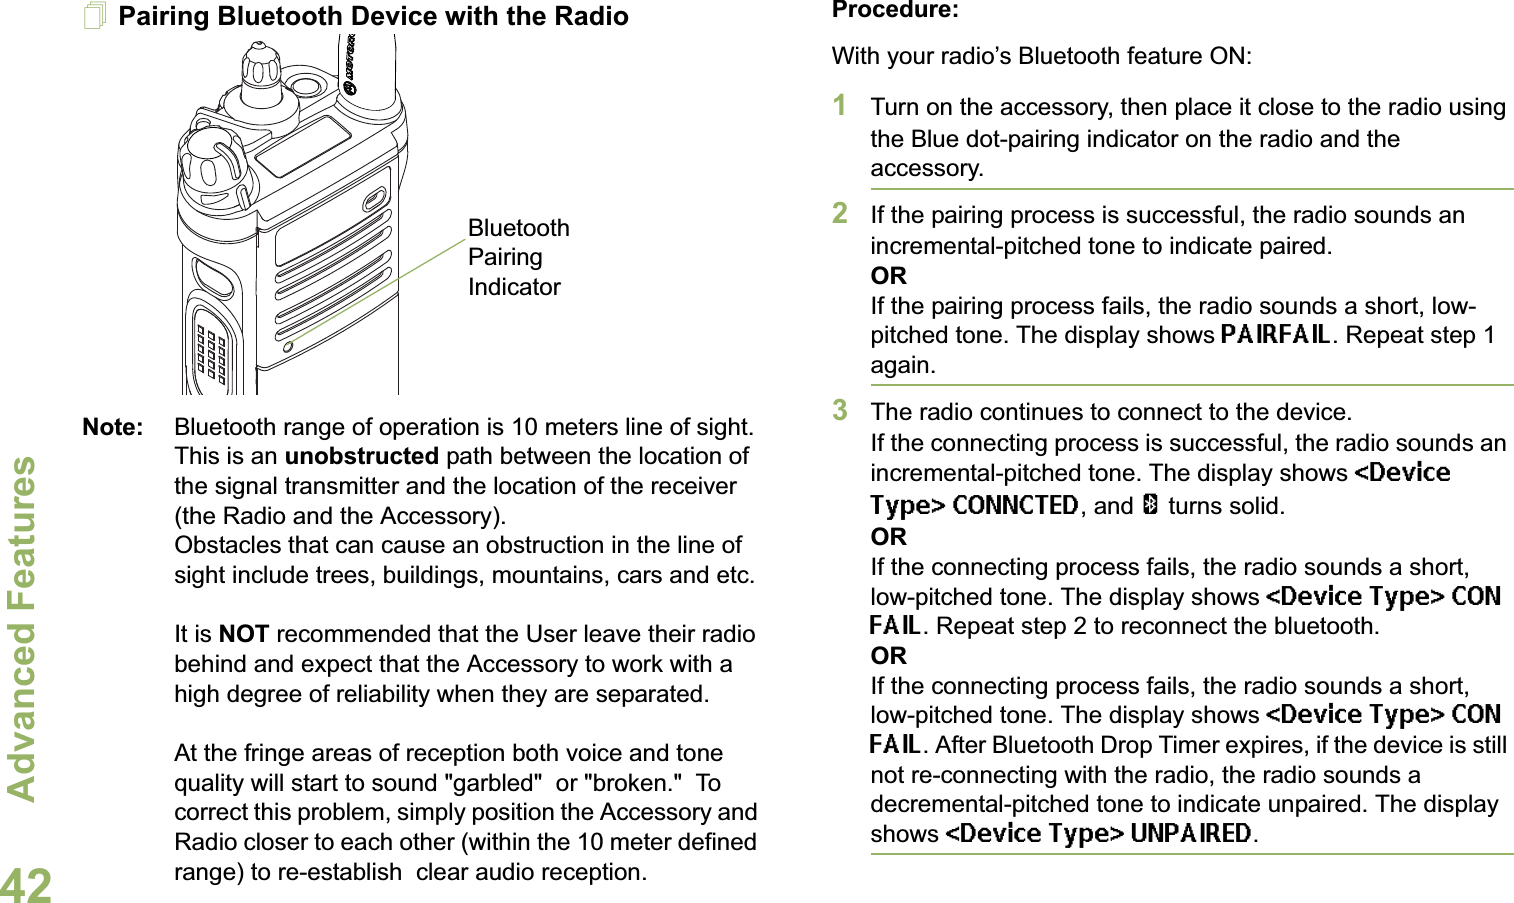 Advanced FeaturesEnglish42Pairing Bluetooth Device with the RadioNote: Bluetooth range of operation is 10 meters line of sight. This is an unobstructed path between the location of the signal transmitter and the location of the receiver (the Radio and the Accessory). Obstacles that can cause an obstruction in the line of sight include trees, buildings, mountains, cars and etc. It is NOT recommended that the User leave their radio behind and expect that the Accessory to work with a high degree of reliability when they are separated.At the fringe areas of reception both voice and tone quality will start to sound &quot;garbled&quot;  or &quot;broken.&quot;  To correct this problem, simply position the Accessory and Radio closer to each other (within the 10 meter defined range) to re-establish  clear audio reception.Procedure:With your radio’s Bluetooth feature ON:1Turn on the accessory, then place it close to the radio using the Blue dot-pairing indicator on the radio and the accessory.2If the pairing process is successful, the radio sounds an incremental-pitched tone to indicate paired. ORIf the pairing process fails, the radio sounds a short, low-pitched tone. The display shows PAIRFAIL. Repeat step 1 again.3The radio continues to connect to the device. If the connecting process is successful, the radio sounds an incremental-pitched tone. The display shows &lt;Device Type&gt; CONNCTED, and a turns solid.ORIf the connecting process fails, the radio sounds a short, low-pitched tone. The display shows &lt;Device Type&gt; CON FAIL. Repeat step 2 to reconnect the bluetooth.ORIf the connecting process fails, the radio sounds a short, low-pitched tone. The display shows &lt;Device Type&gt; CON FAIL. After Bluetooth Drop Timer expires, if the device is still not re-connecting with the radio, the radio sounds a decremental-pitched tone to indicate unpaired. The display shows &lt;Device Type&gt; UNPAIRED. Bluetooth Pairing Indicator